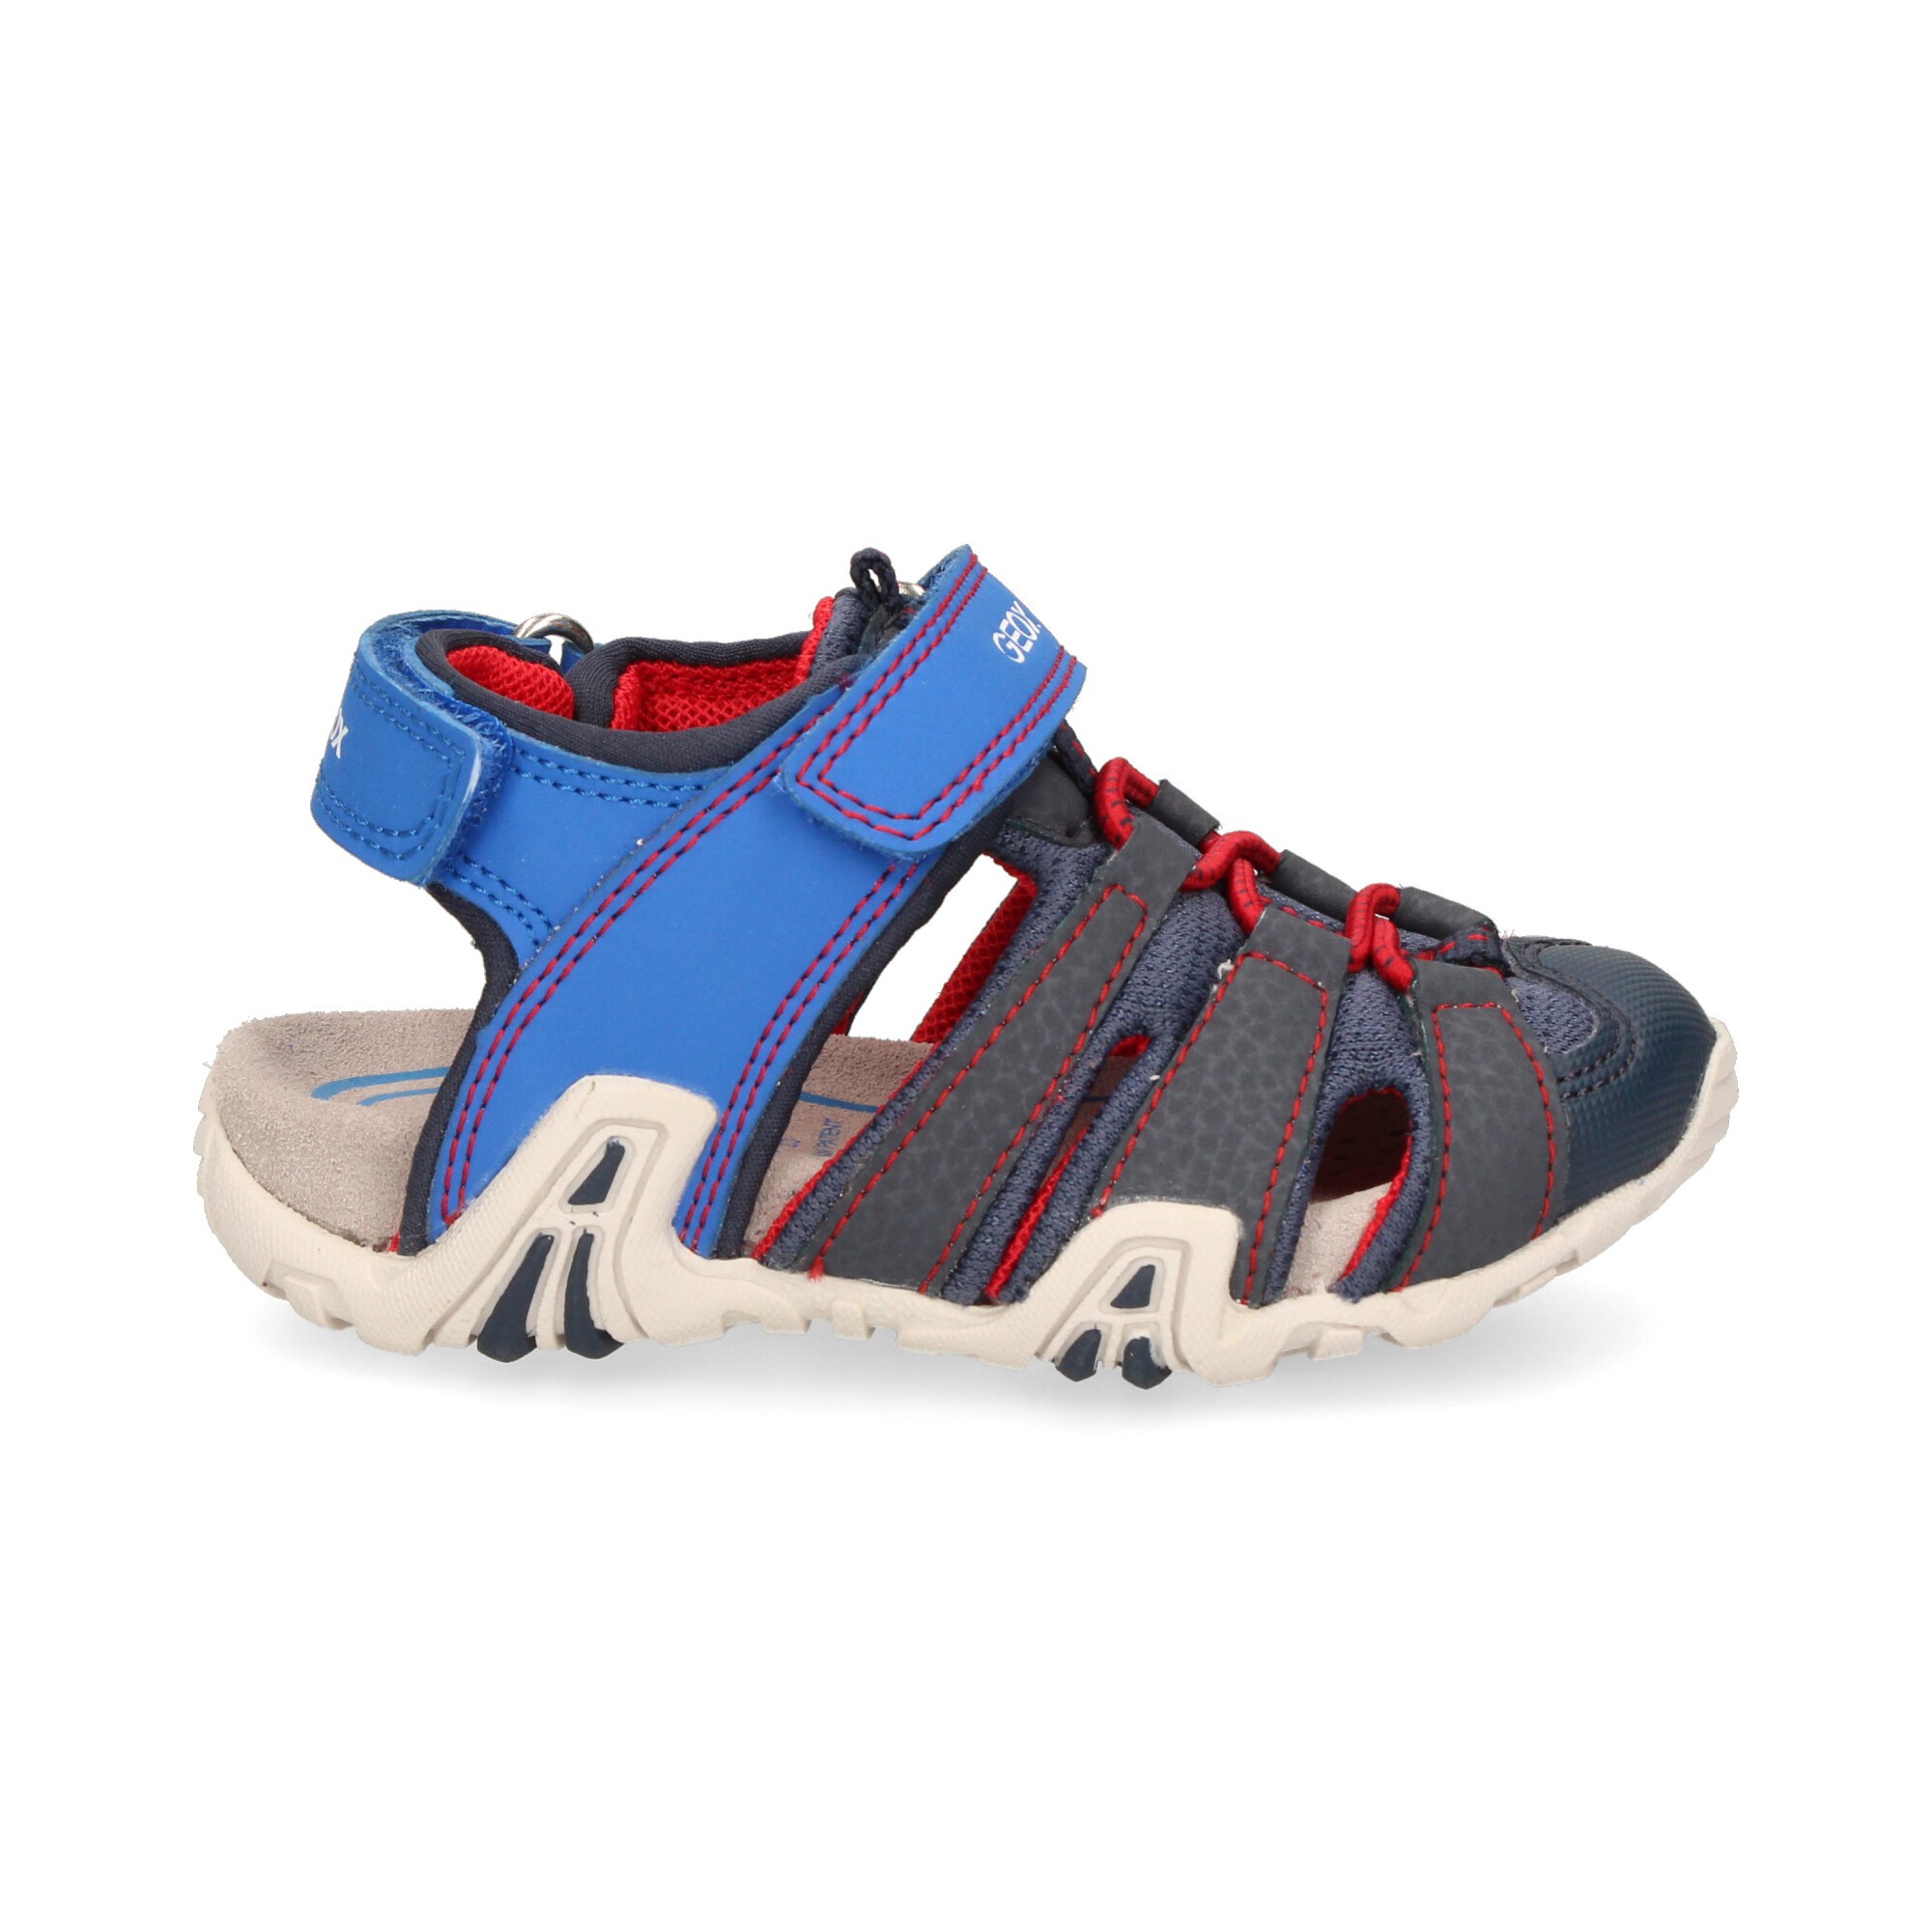 forma Desconocido prisa GEOX Boys sandals and flip flops B1524A C0833 ROYAL/RED